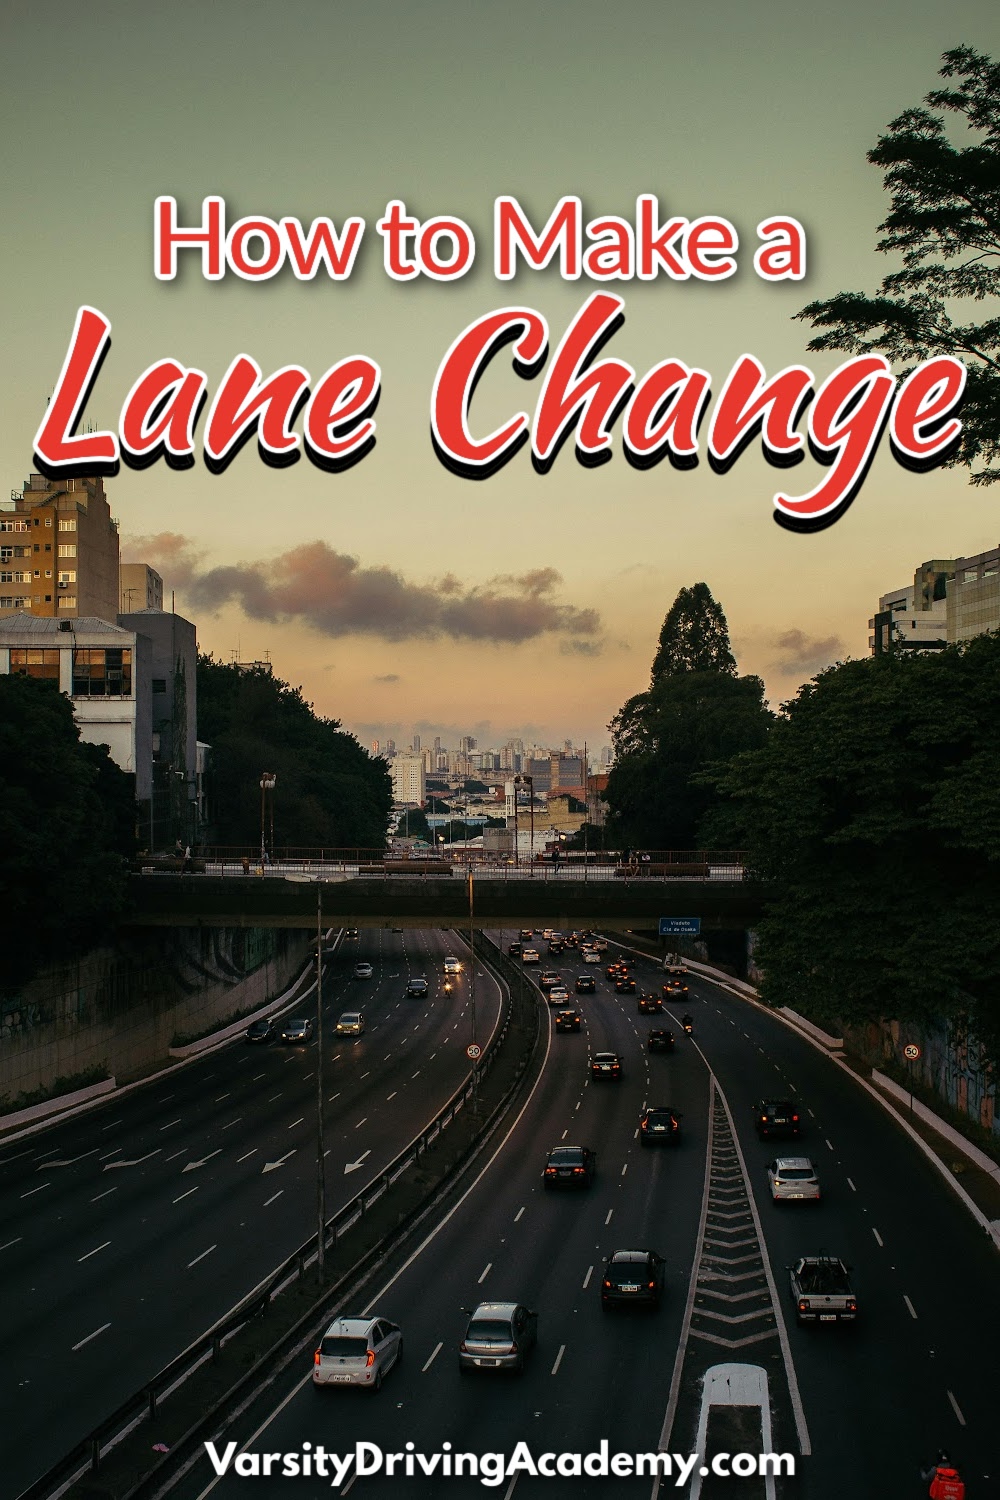 Knowing how to make a lane change is one of the most important things to know about driving.